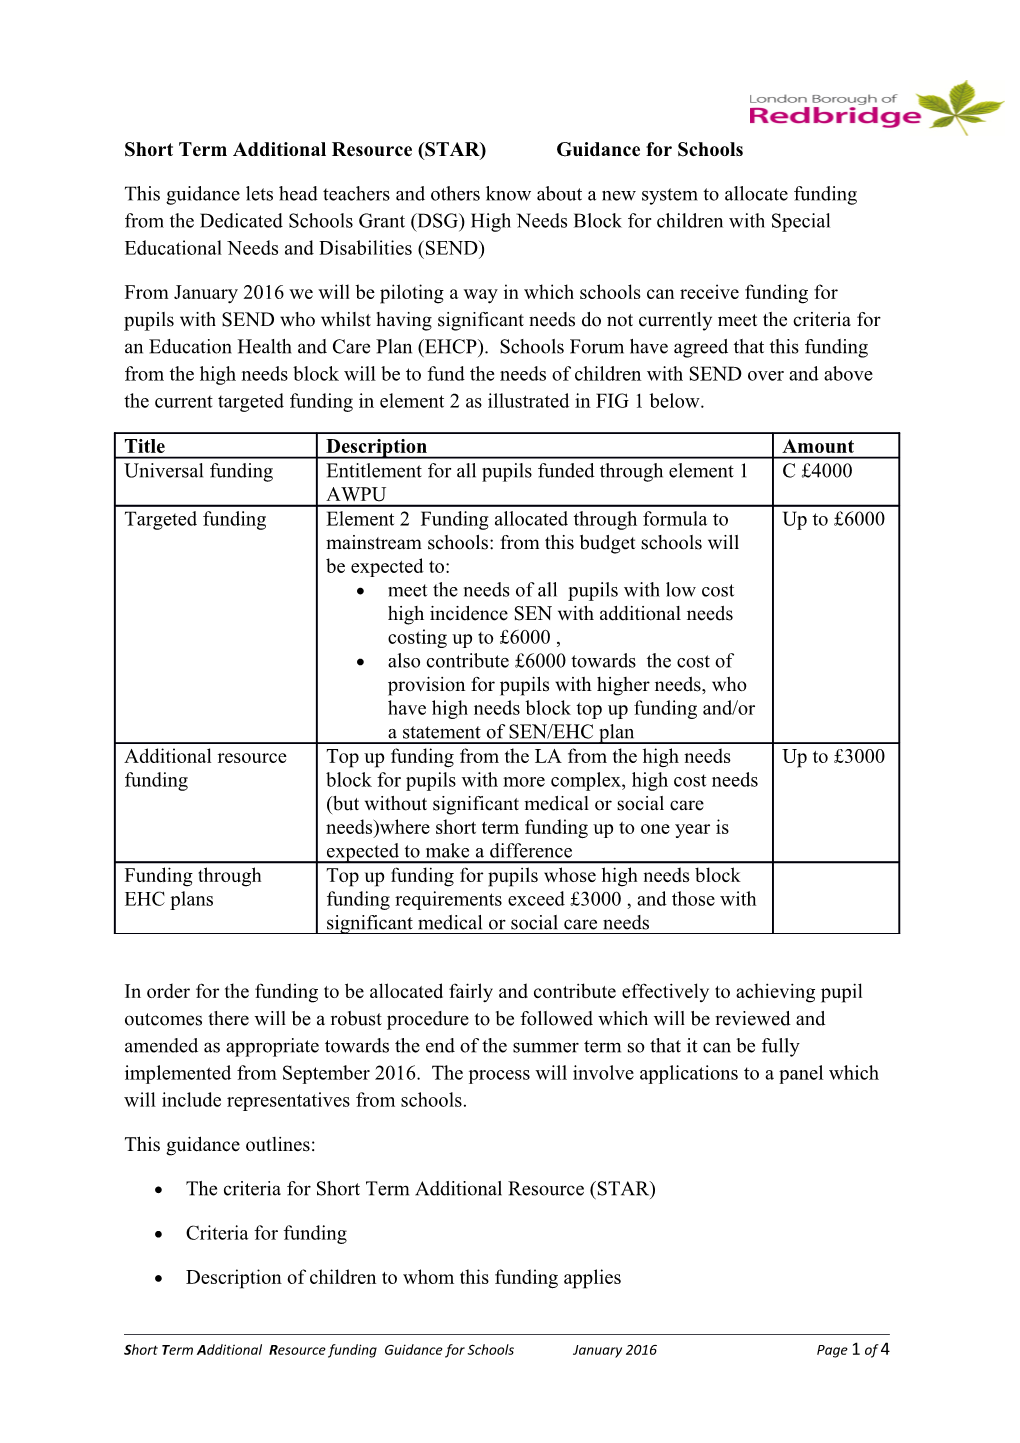 Short Term Additional Resource (STAR) Guidance for Schools